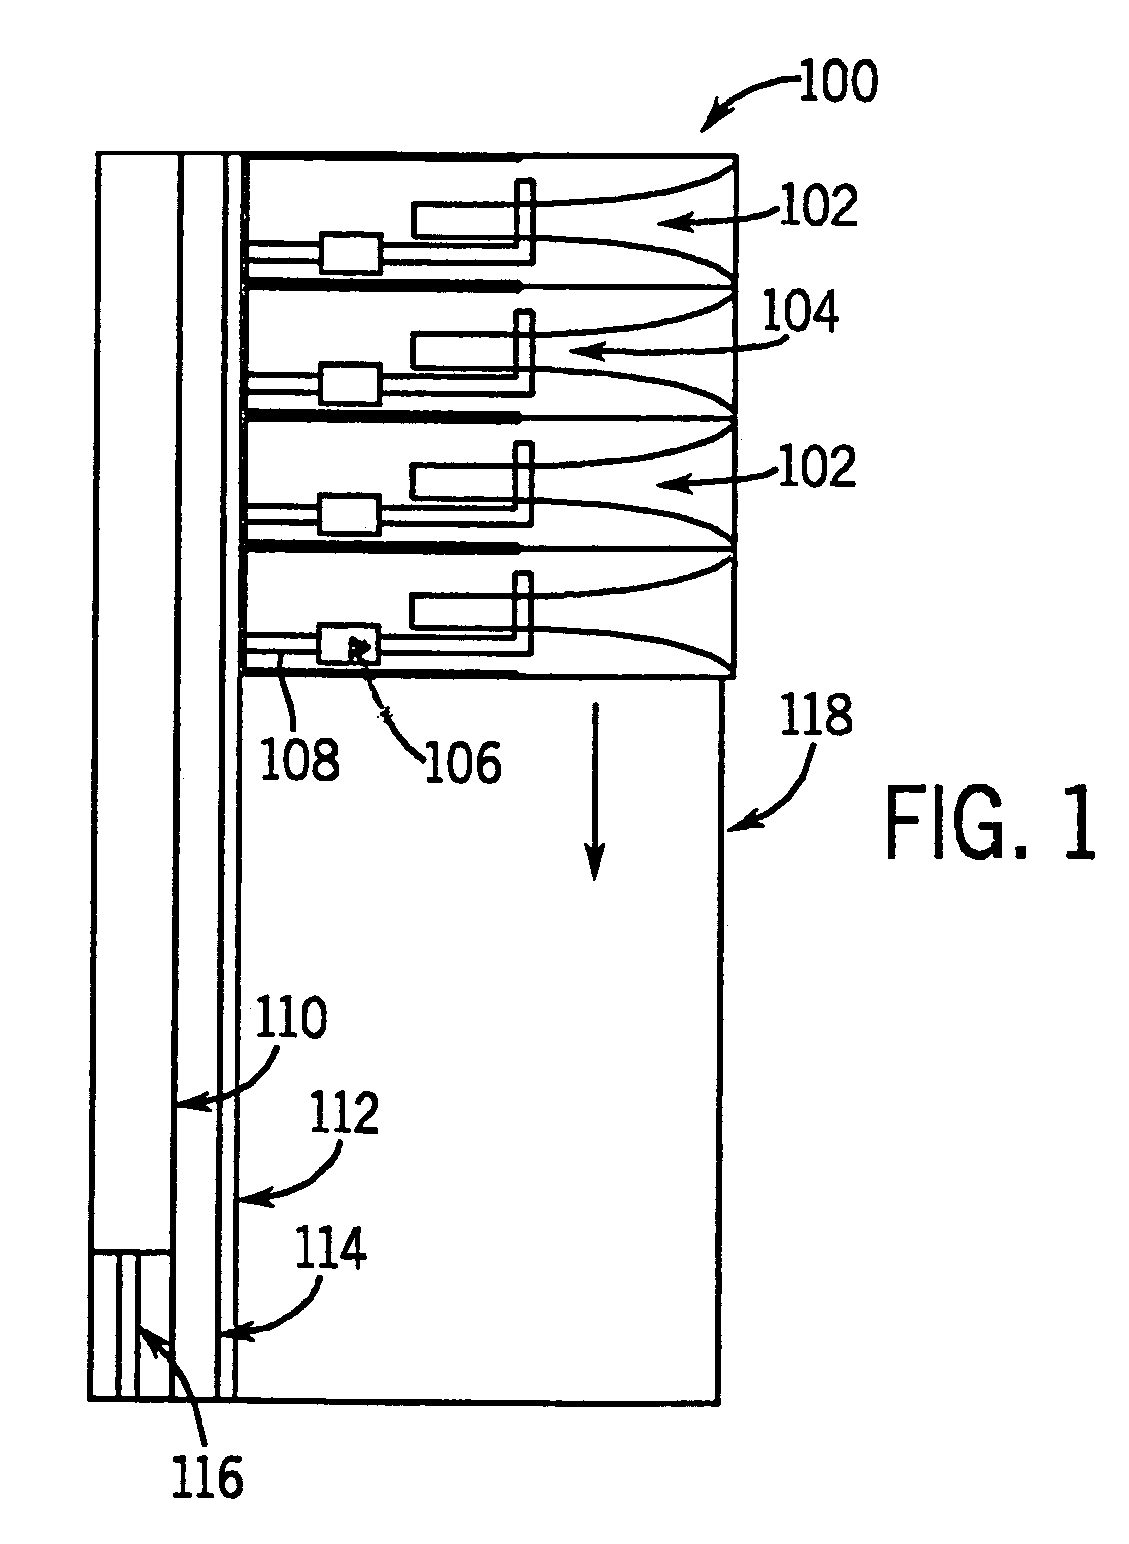 Phased array antenna interconnect having substrate slat structures